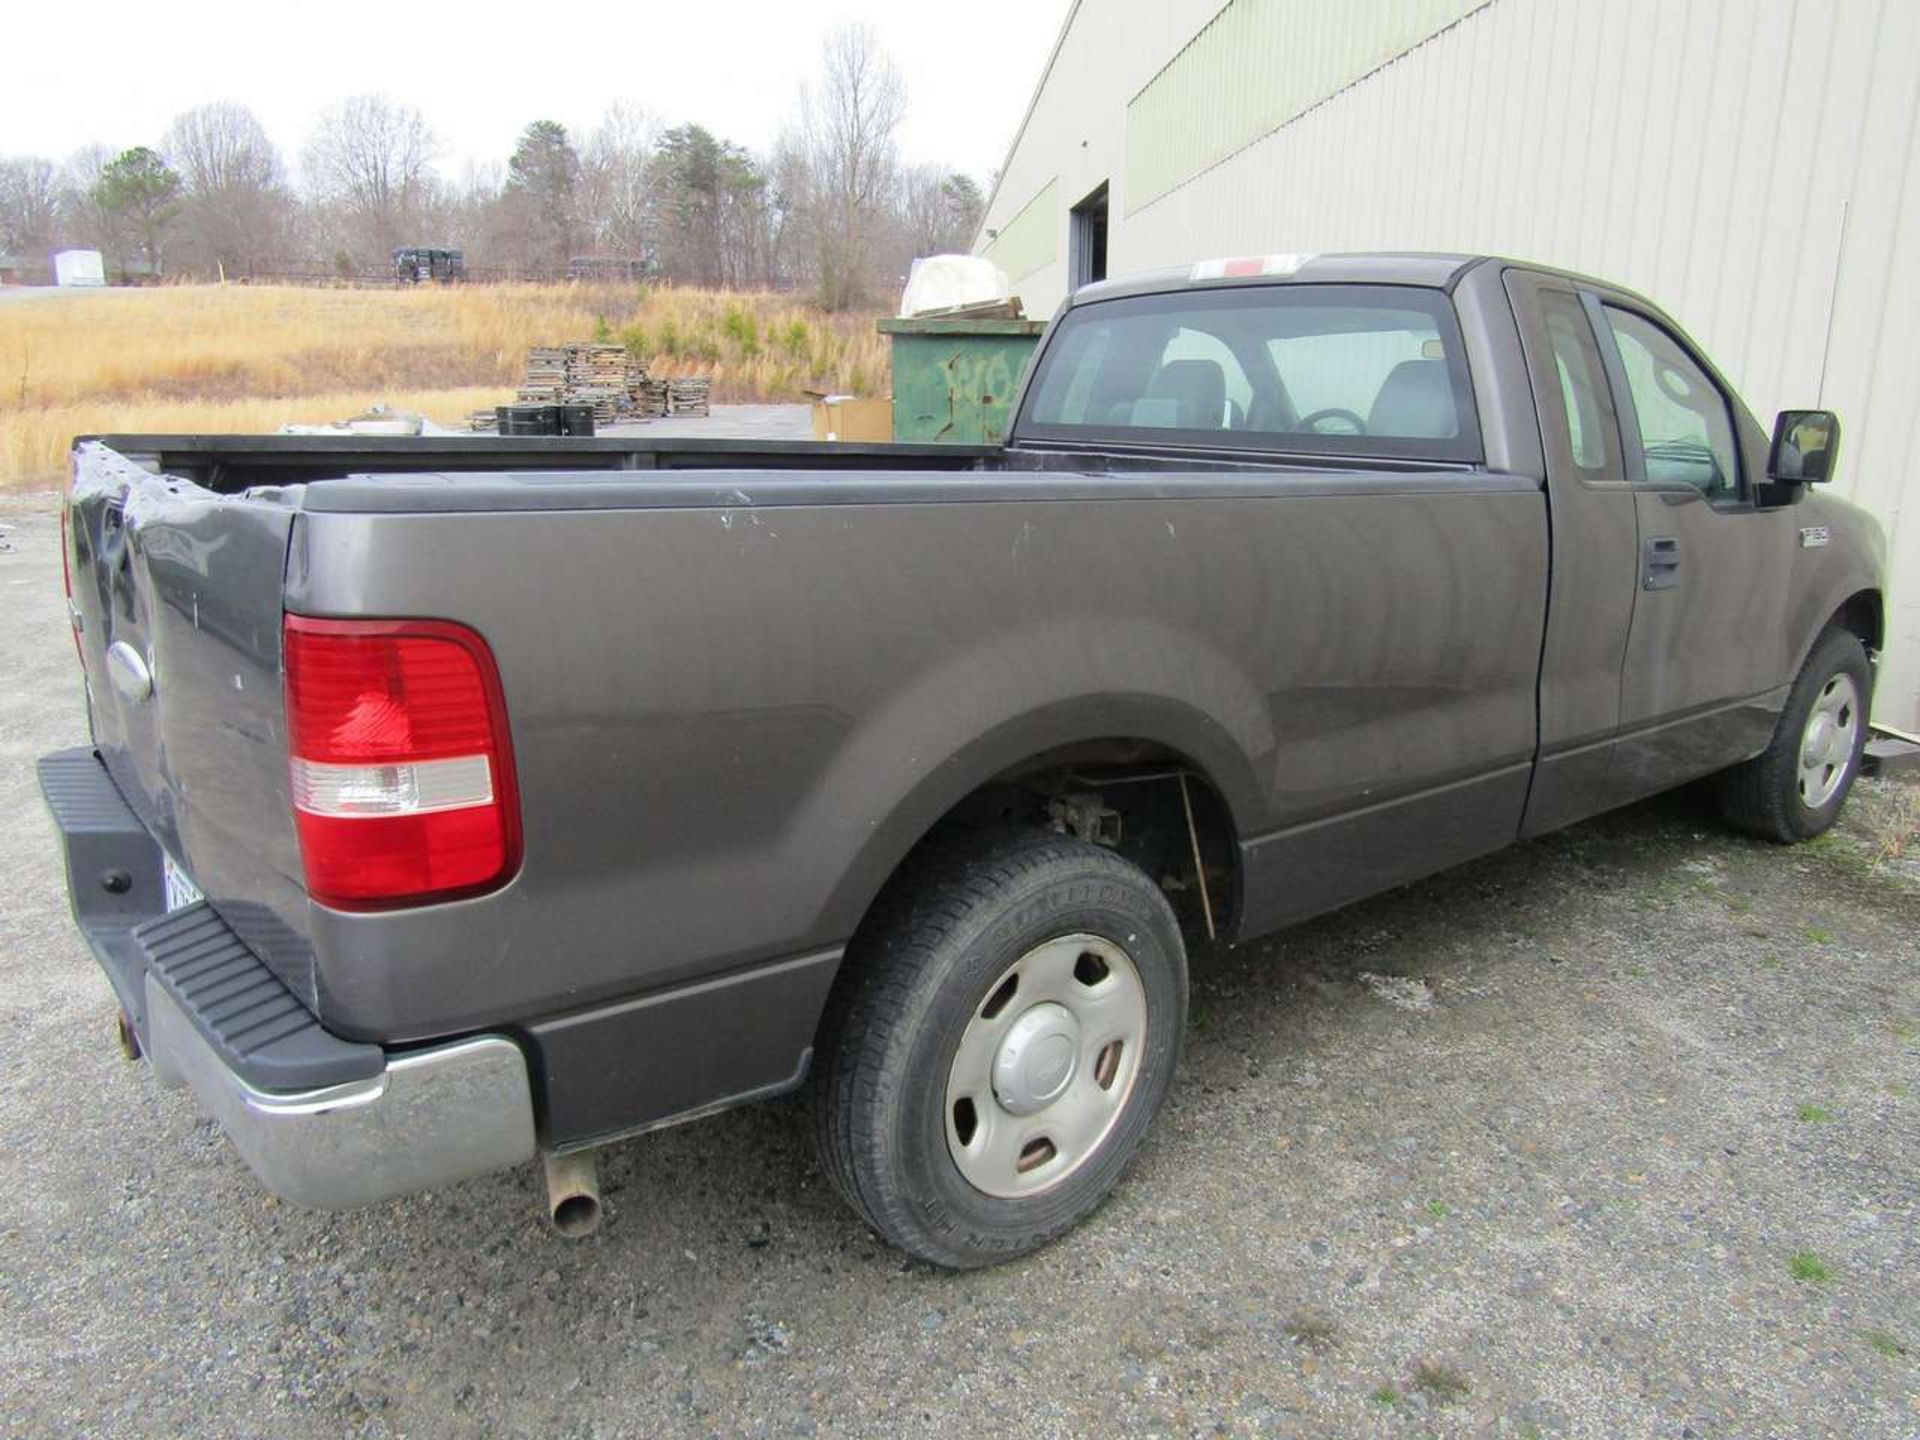 2007 Ford F-150 XL Triton Pick-Up Truck 4.6L V8 Engine, 8' Bed, GVWR 6800 lbs., 108687 Miles, S/N - Image 4 of 7